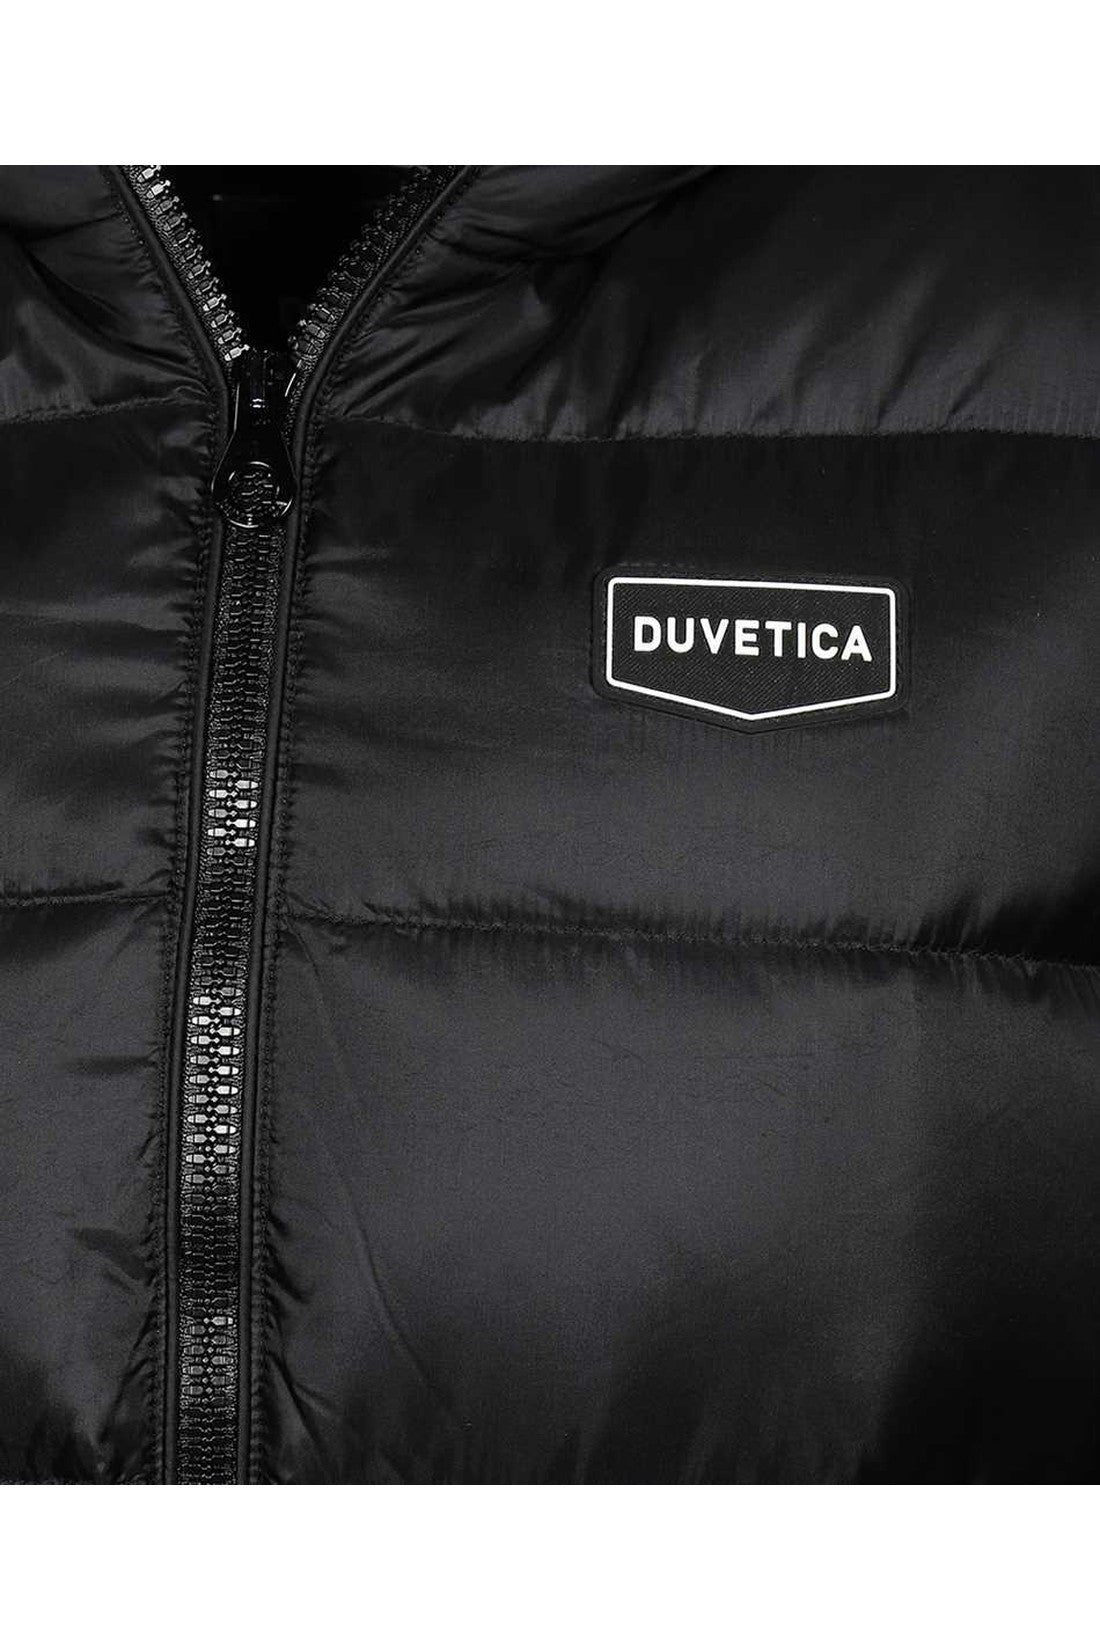 Duvetica-OUTLET-SALE-Belted-hooded-long-down-jacket-Jacken-Mantel-ARCHIVE-COLLECTION-3_968c87cc-ea69-47ba-a44a-9d060bf4eac4.jpg